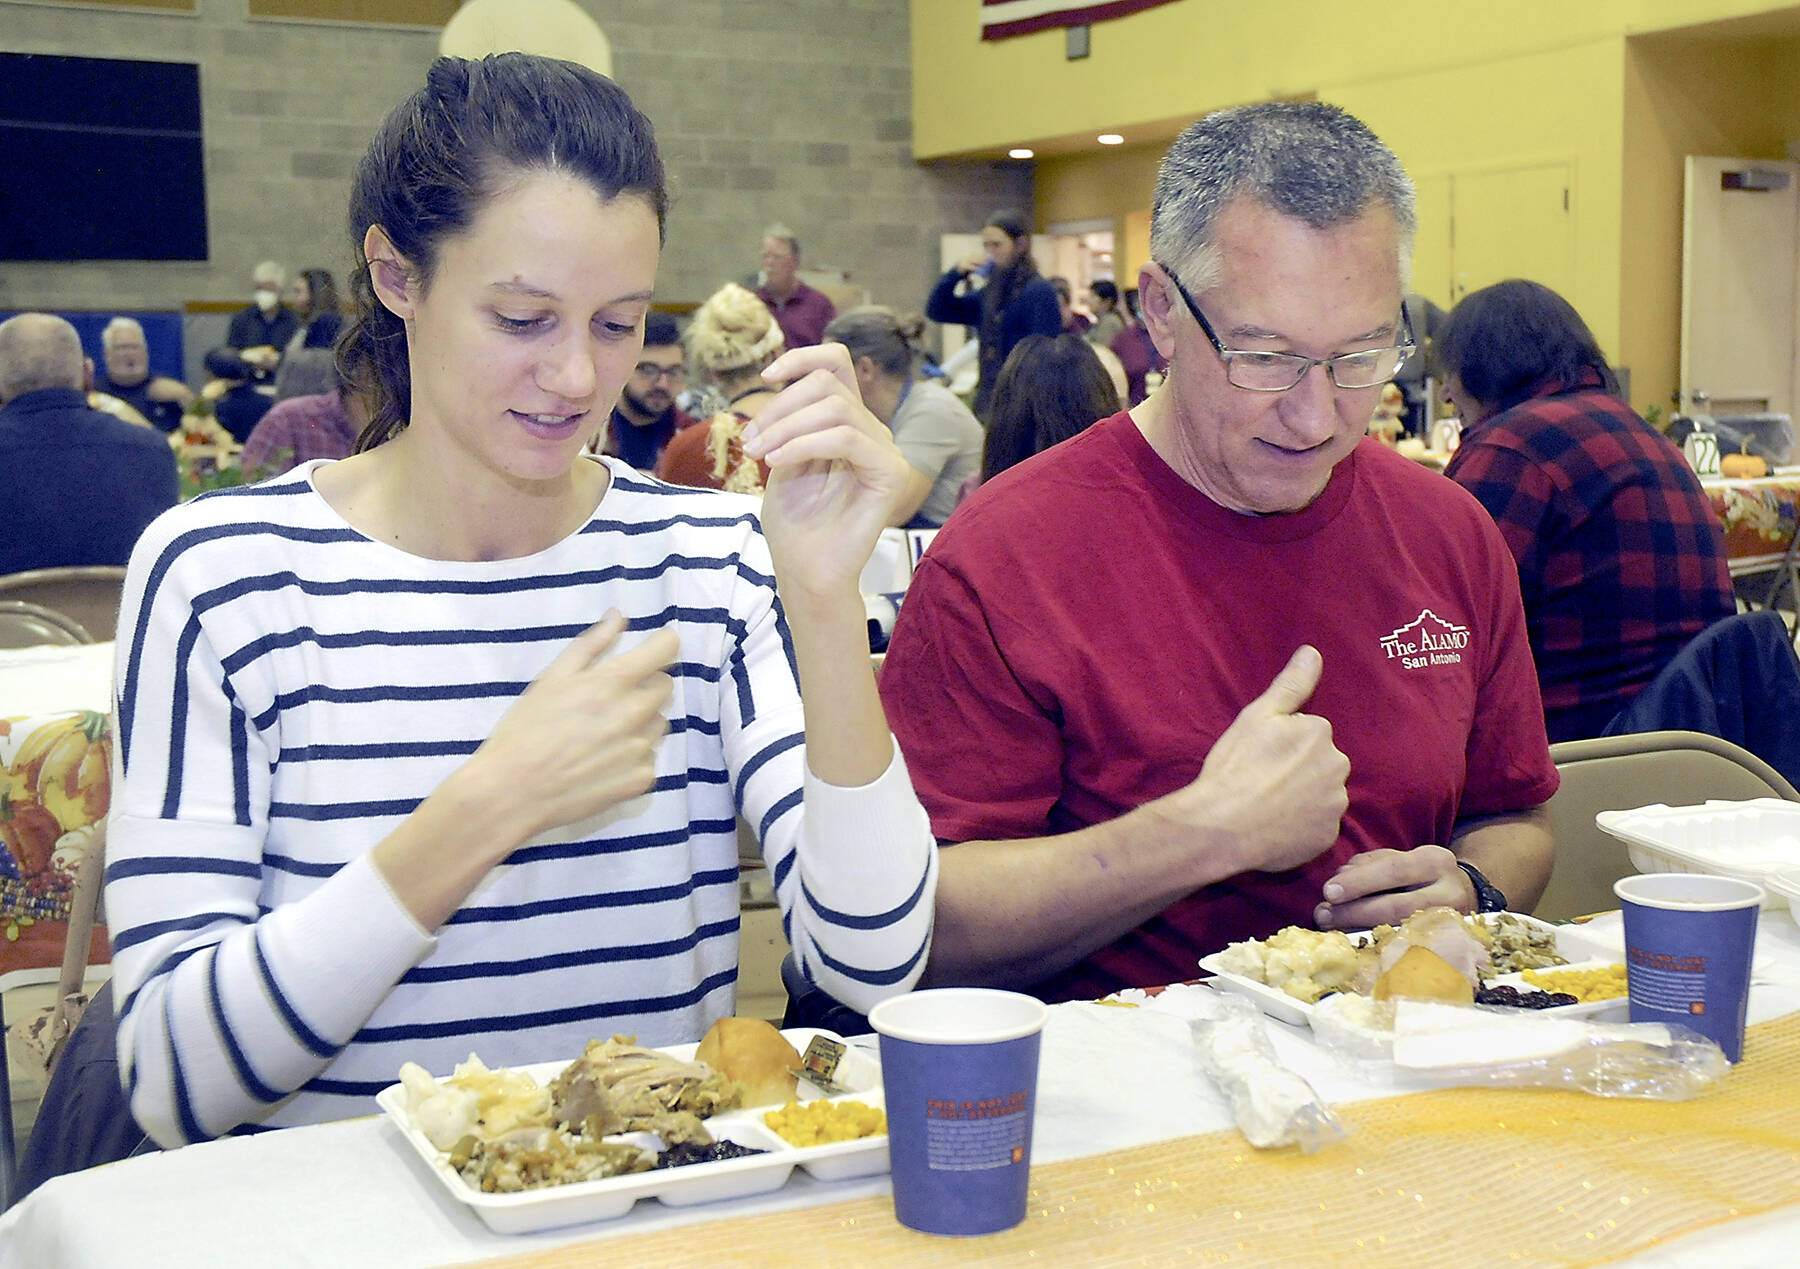 KEITH THORPE/PENINSULA DAILY NEWS
Cecilia Stevenson, of Dallas, left, and her father, Will Stevenson of Port Angeles, say a blessing before enjoying a Thanksgiving meal in the fellowship hall of Queen of Angeles Catholic Church in Port Angeles. The church offered a traditional Thanksgiving dinner for the community, with several hundred diners taking advantage of the in-house meal. Numerous other dinners were sent out for in-home dining.